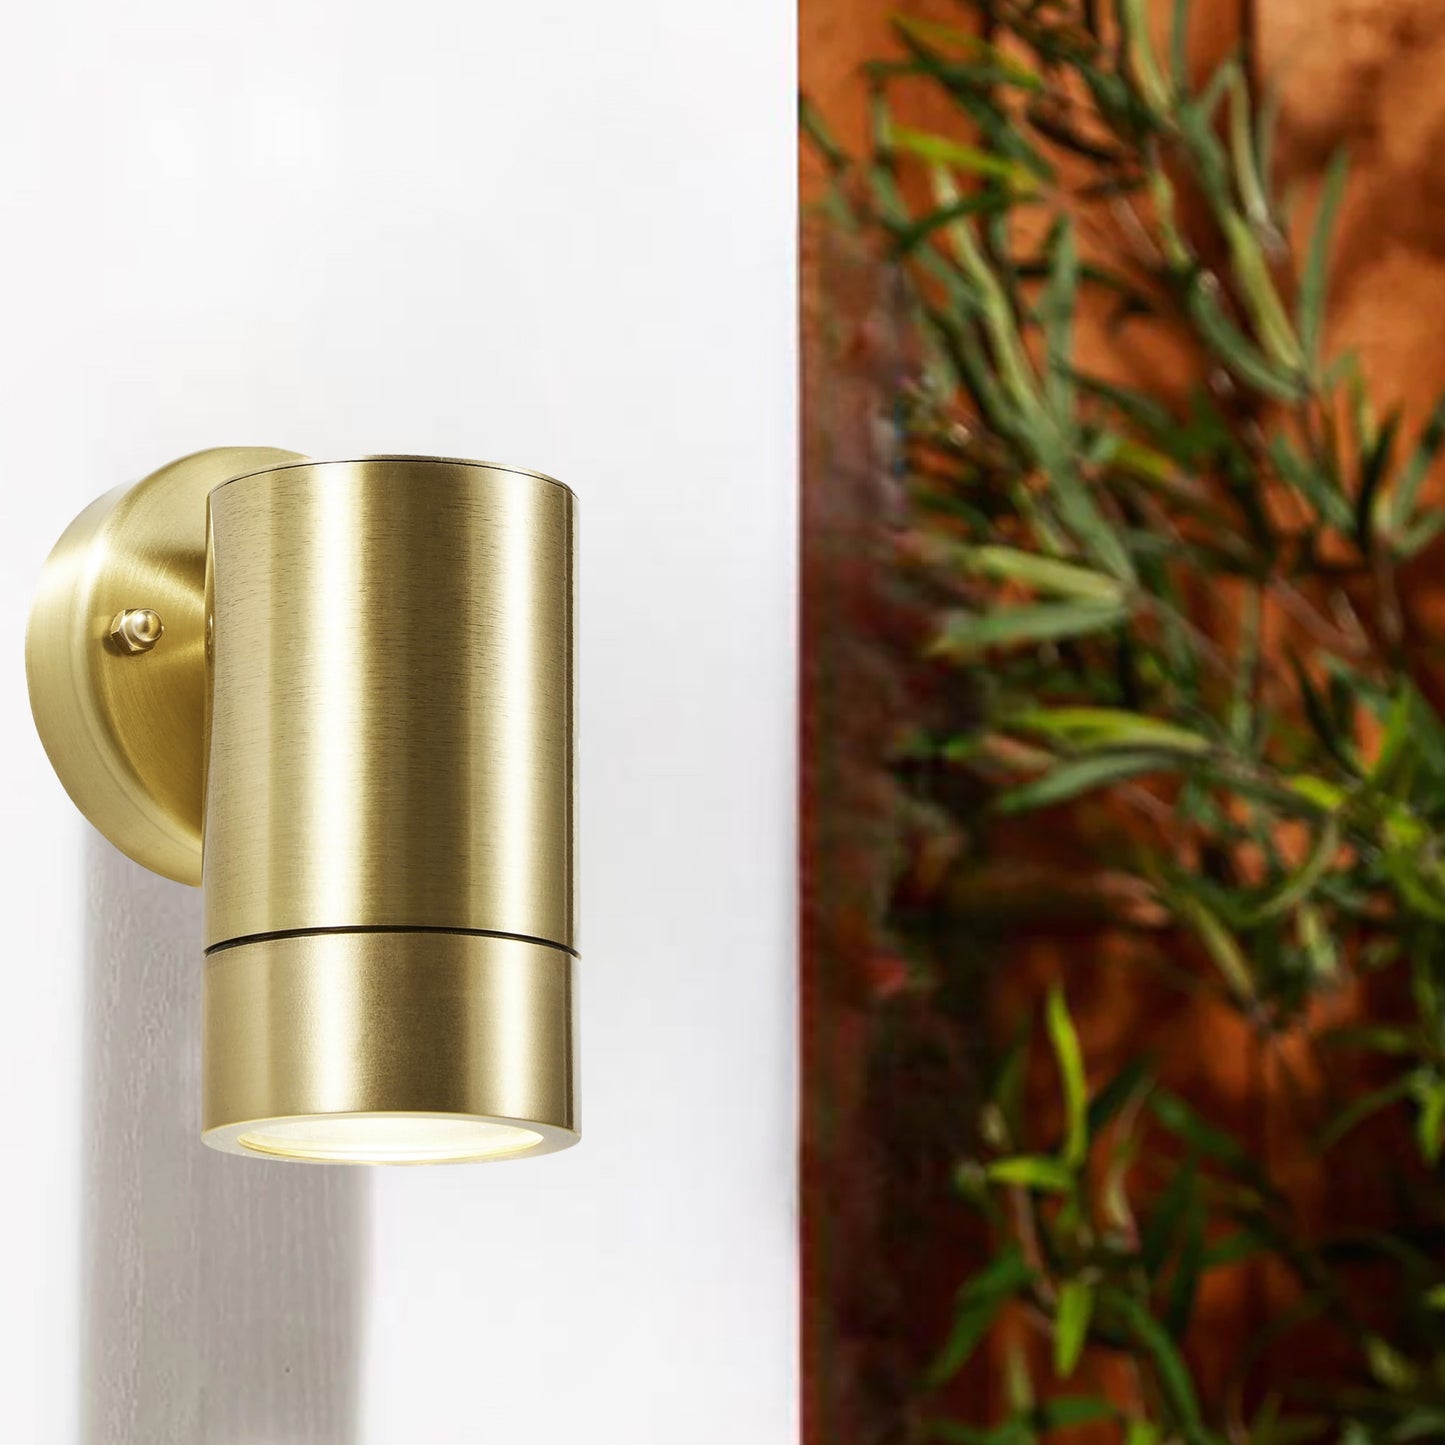 Our Noah brass outdoor wall mounted single cylinder outdoor light would look perfect in a modern or more traditional home design. Outside wall lights can provide atmospheric light in your garden, at the front door or on the terrace as well as a great security solution. It is designed for durability and longevity with its robust material producing a fully weatherproof and water-resistant light fitting. Use LED bulbs to make this light energy efficient and low cost to run.